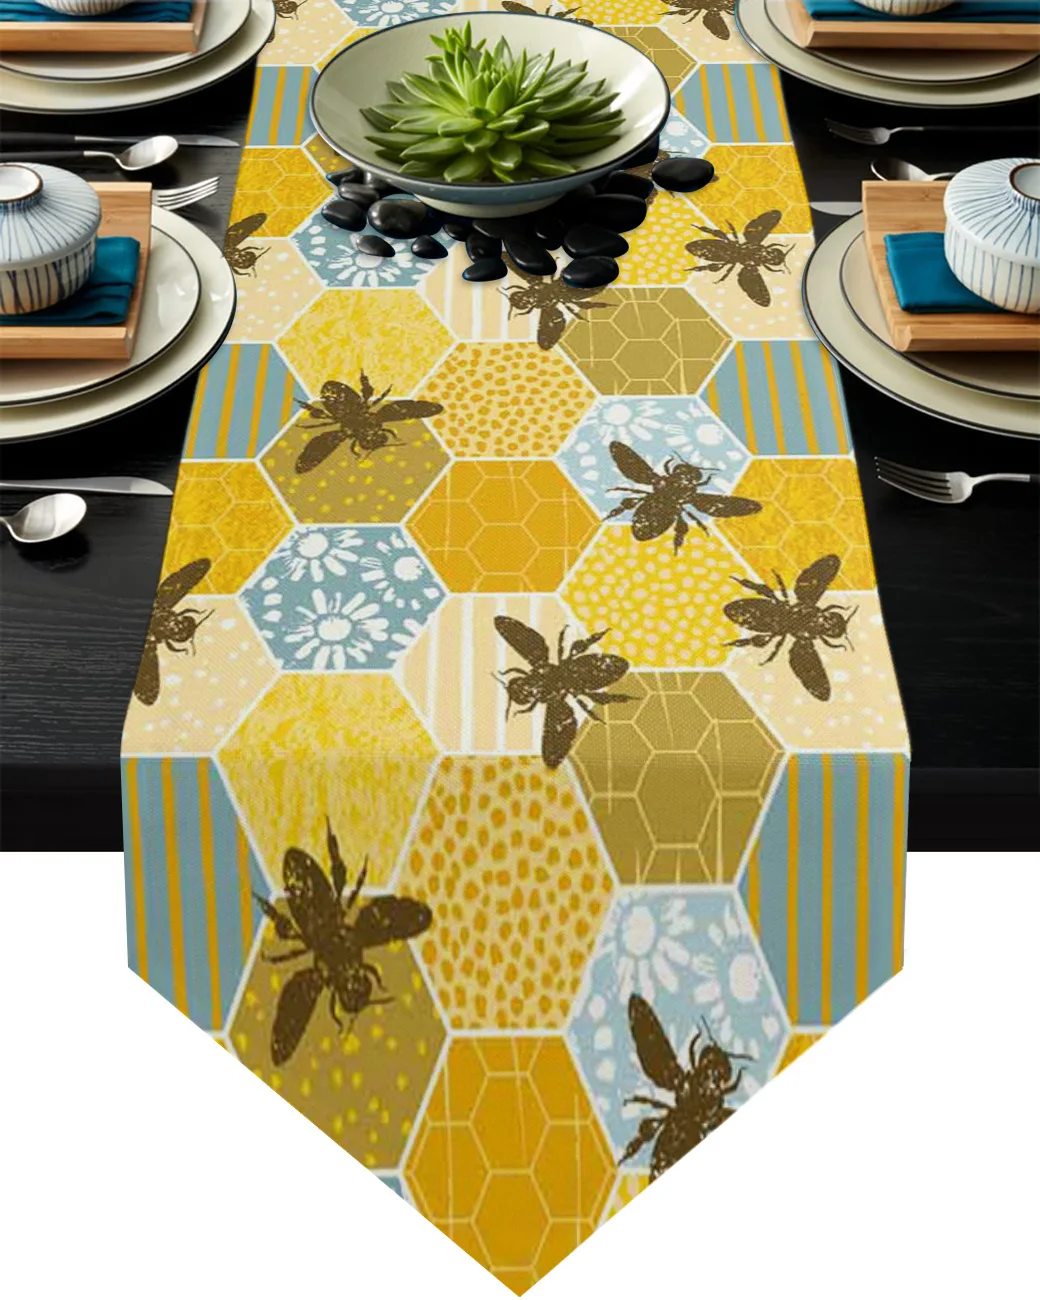 

Bee Hive Flower Morocco Fashion Table Runners Cotton Linen Table Runner Wedding Party Decoration Home Table Runner